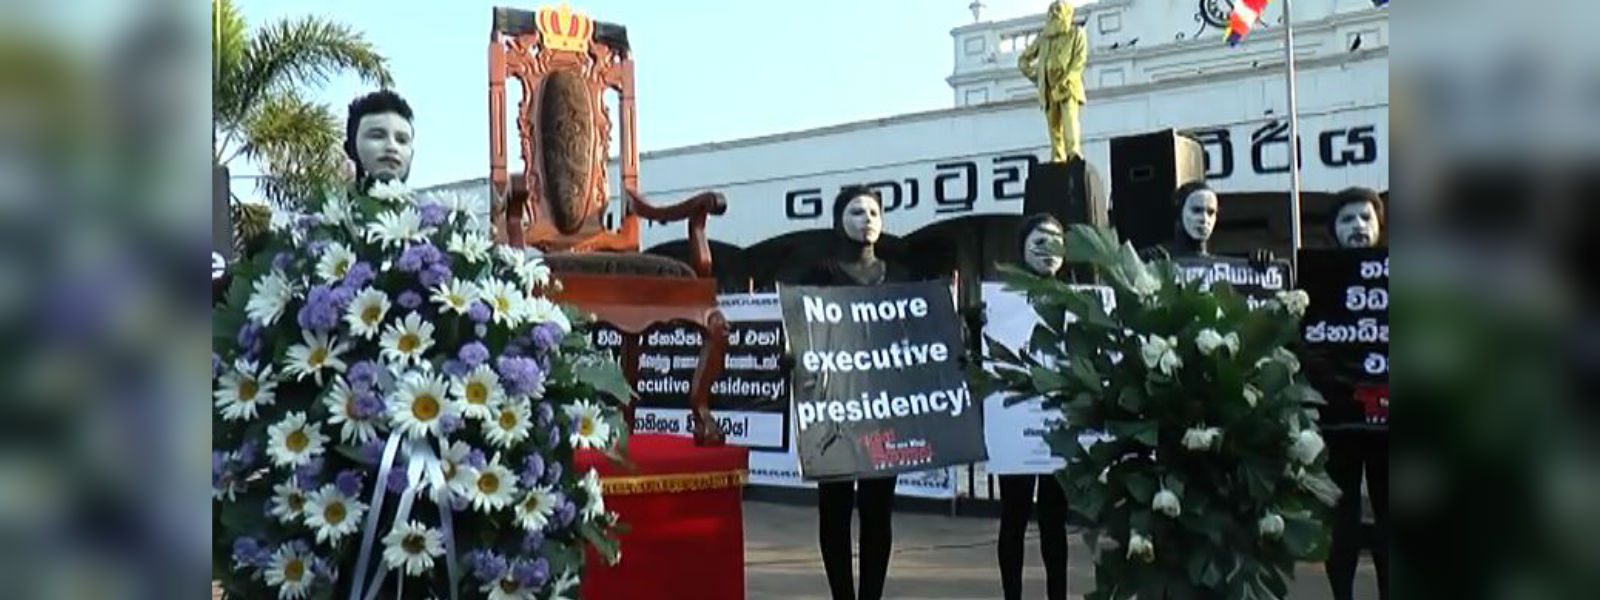 Silent protest call for executive to be abolished